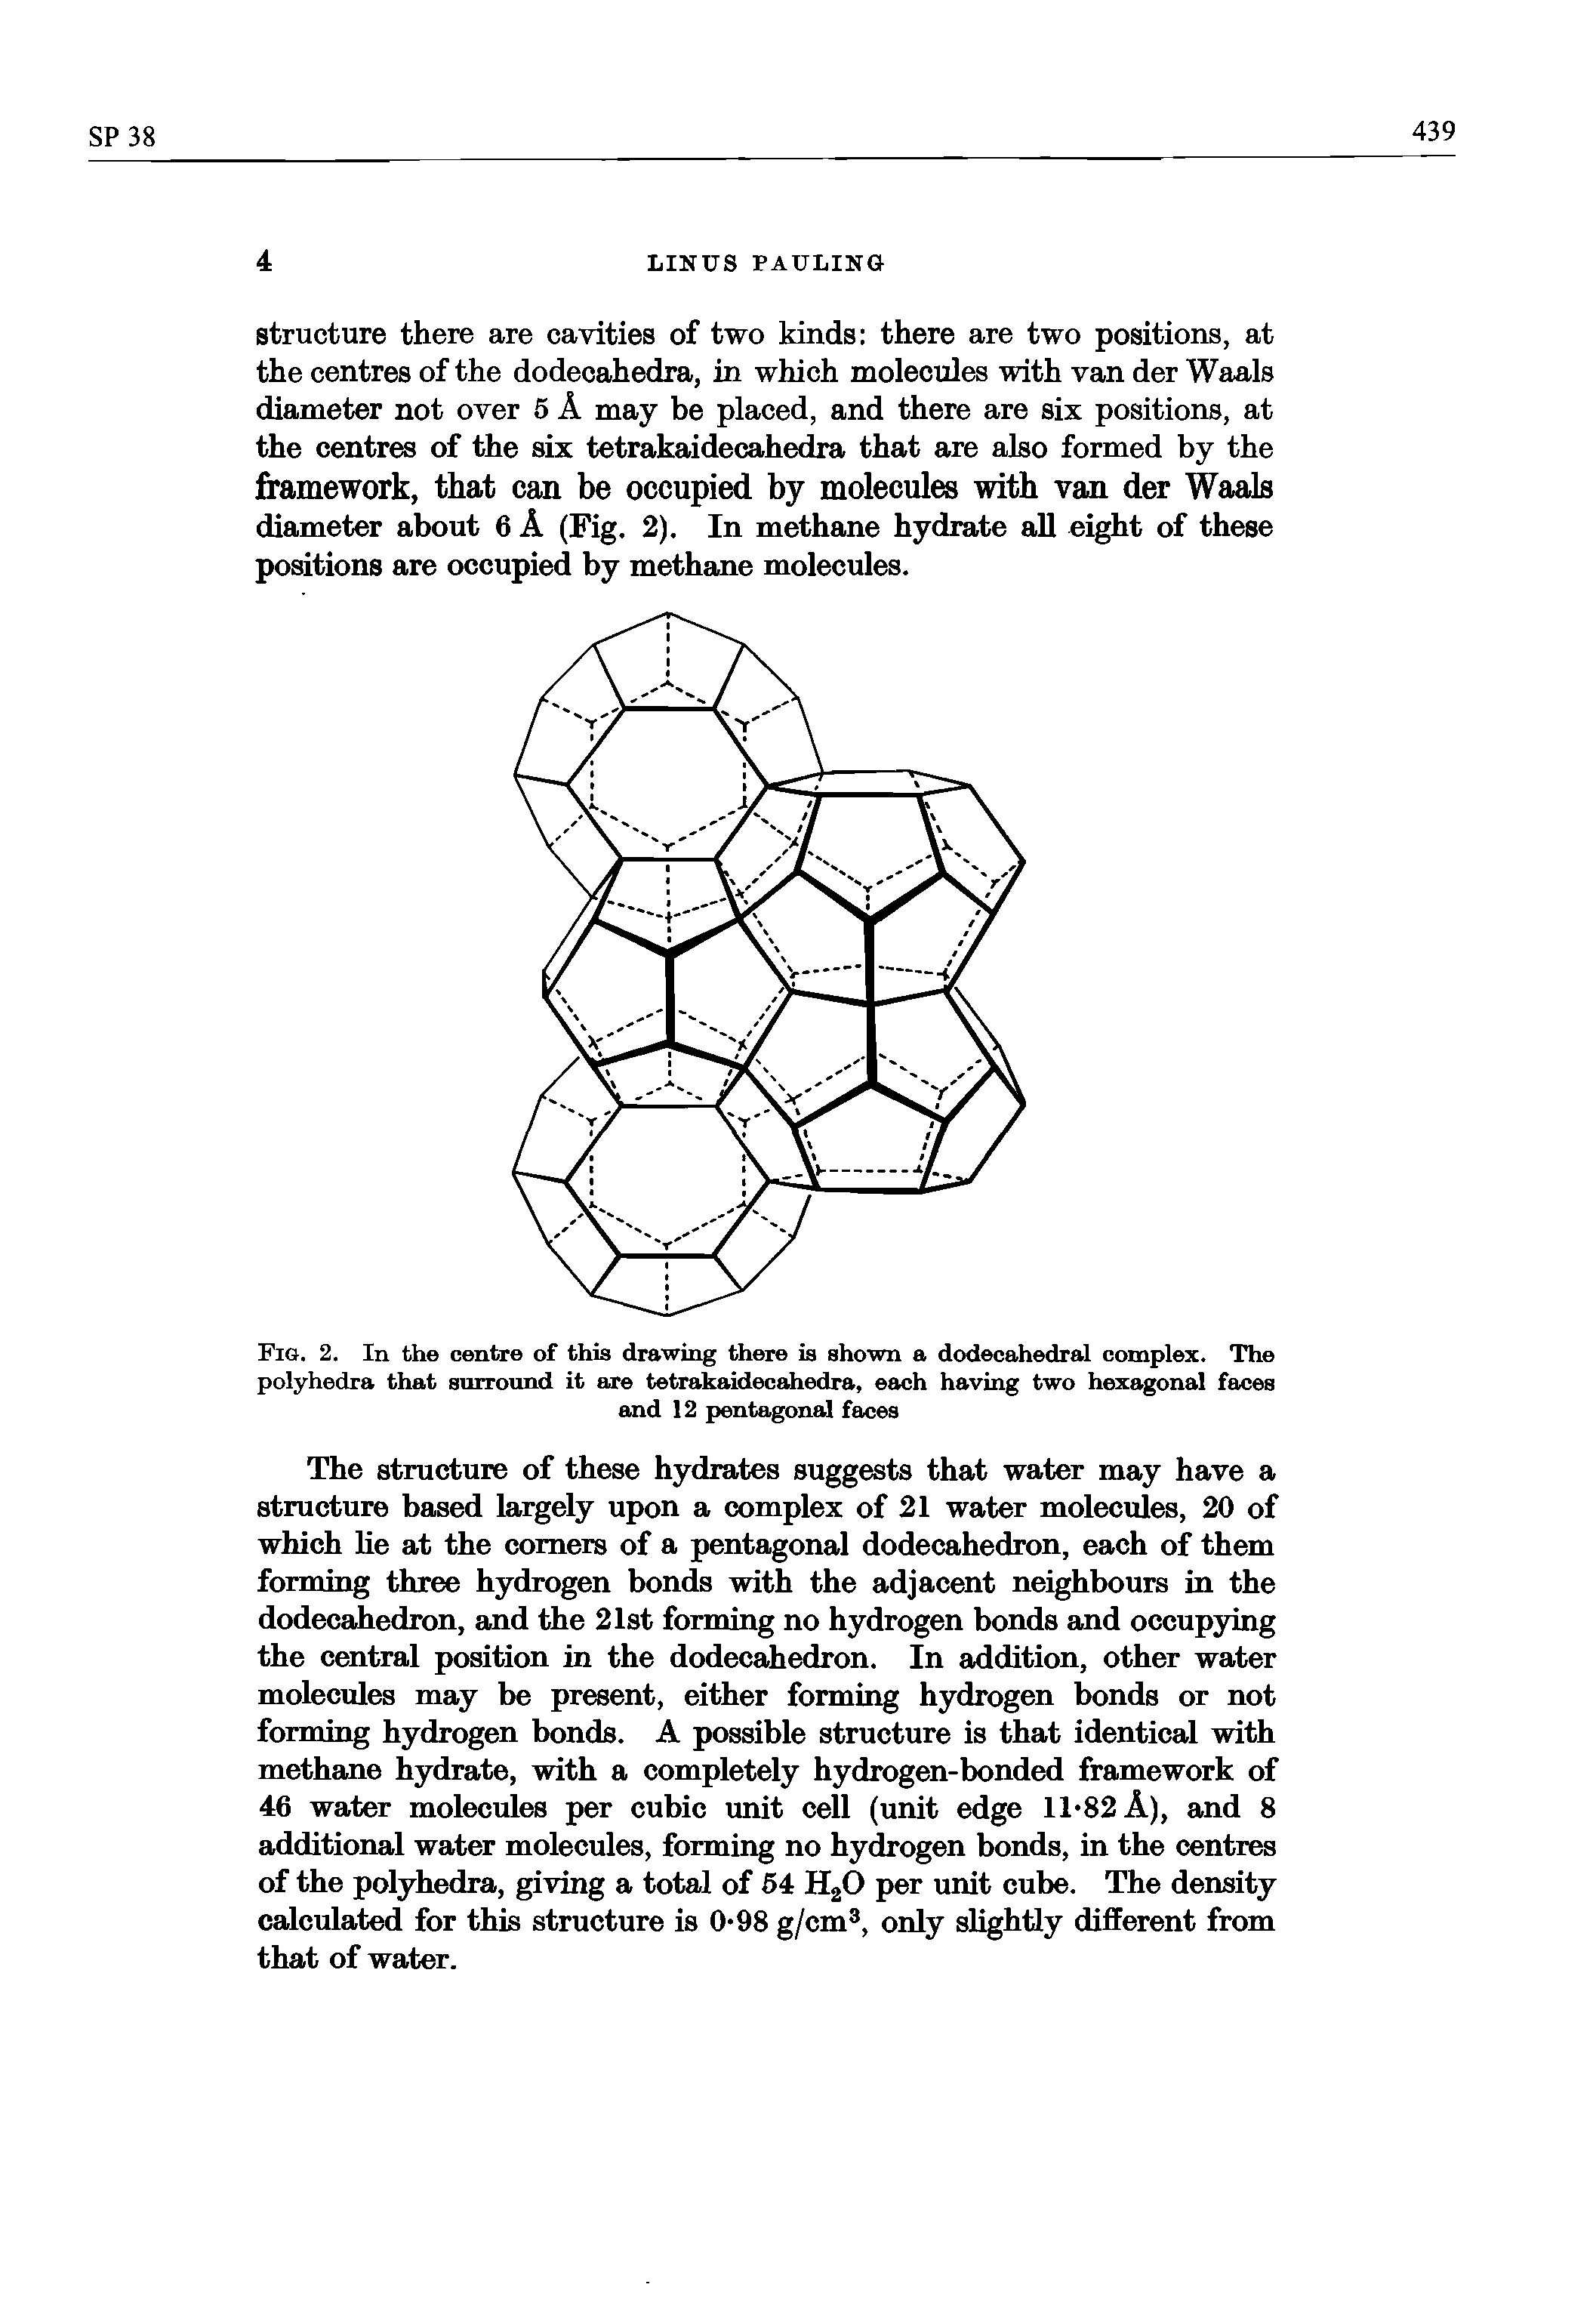 Fig. 2. In the centre of this drawing there is shown a dodecahedral complex. The polyhedra that surround it are tetrakaidecahedra, each having two hexagonal faces...